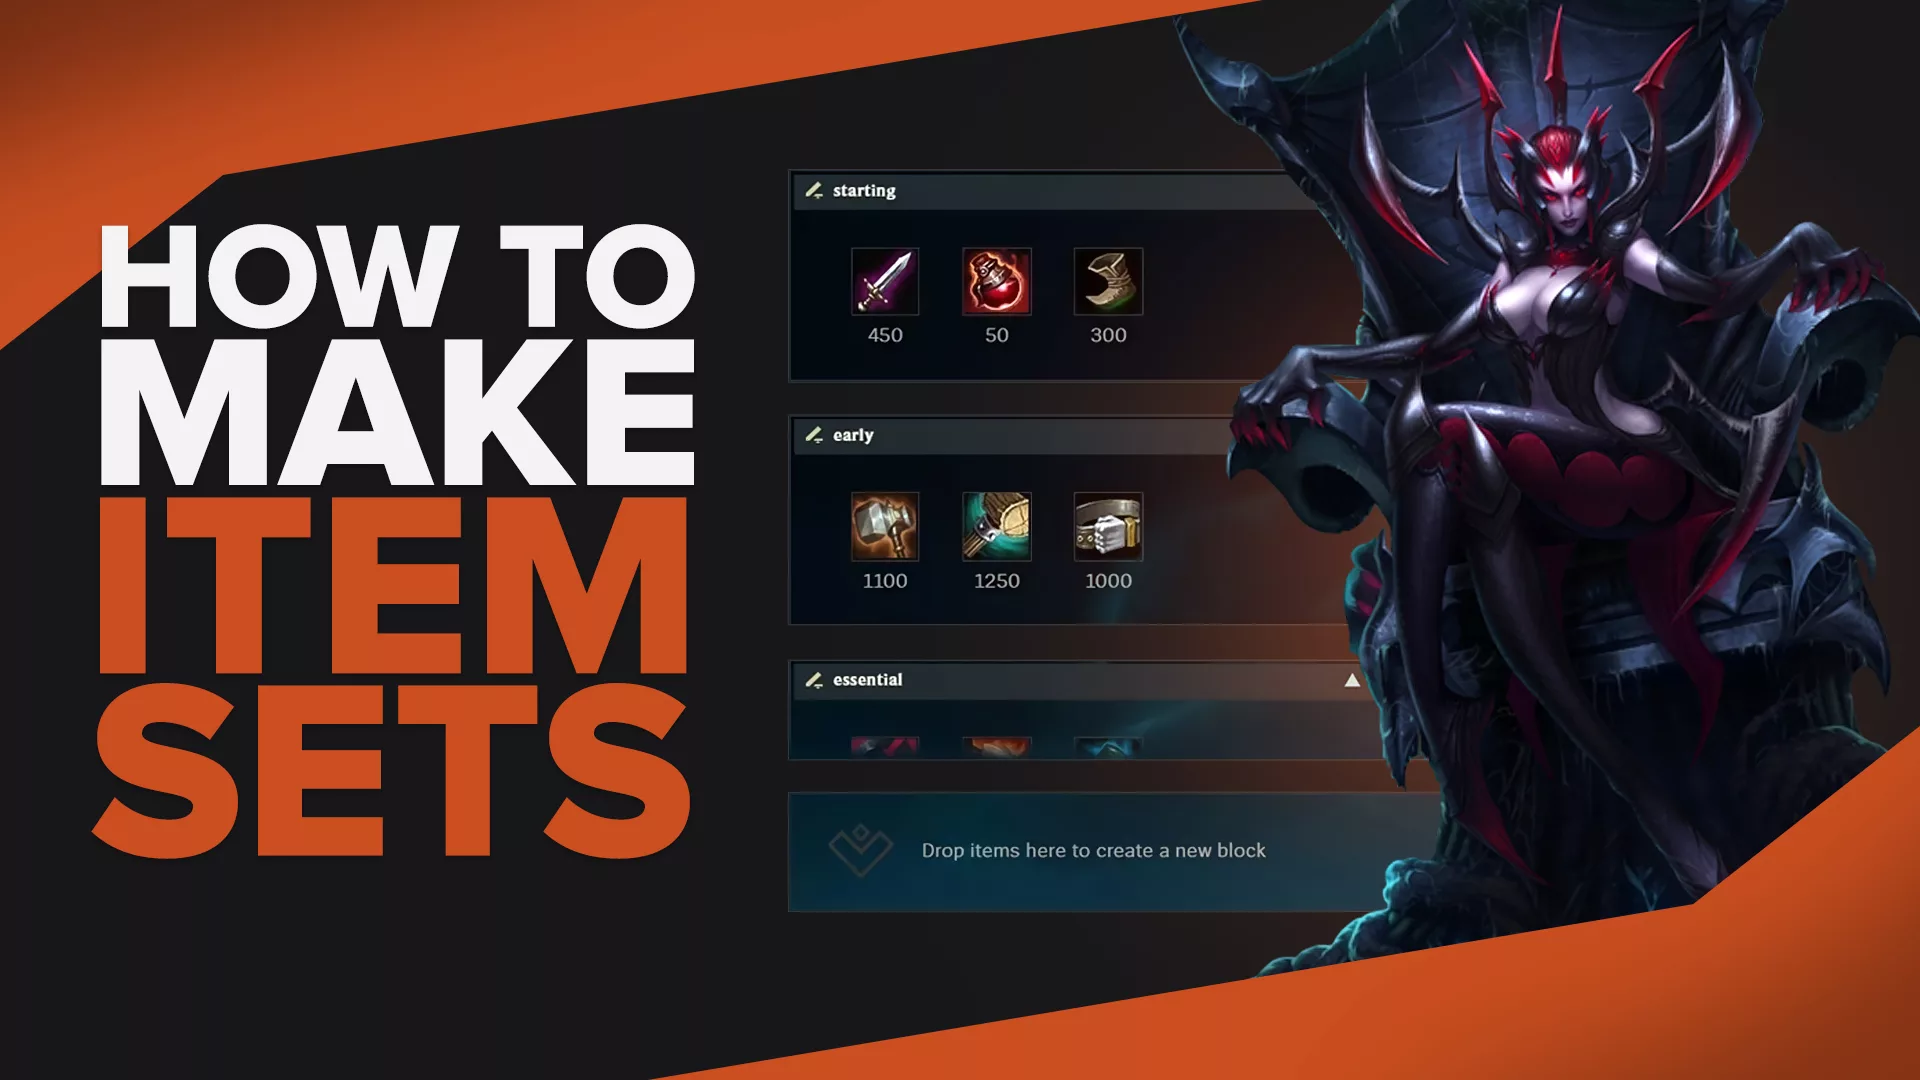 How to make item sets in League of Legends?